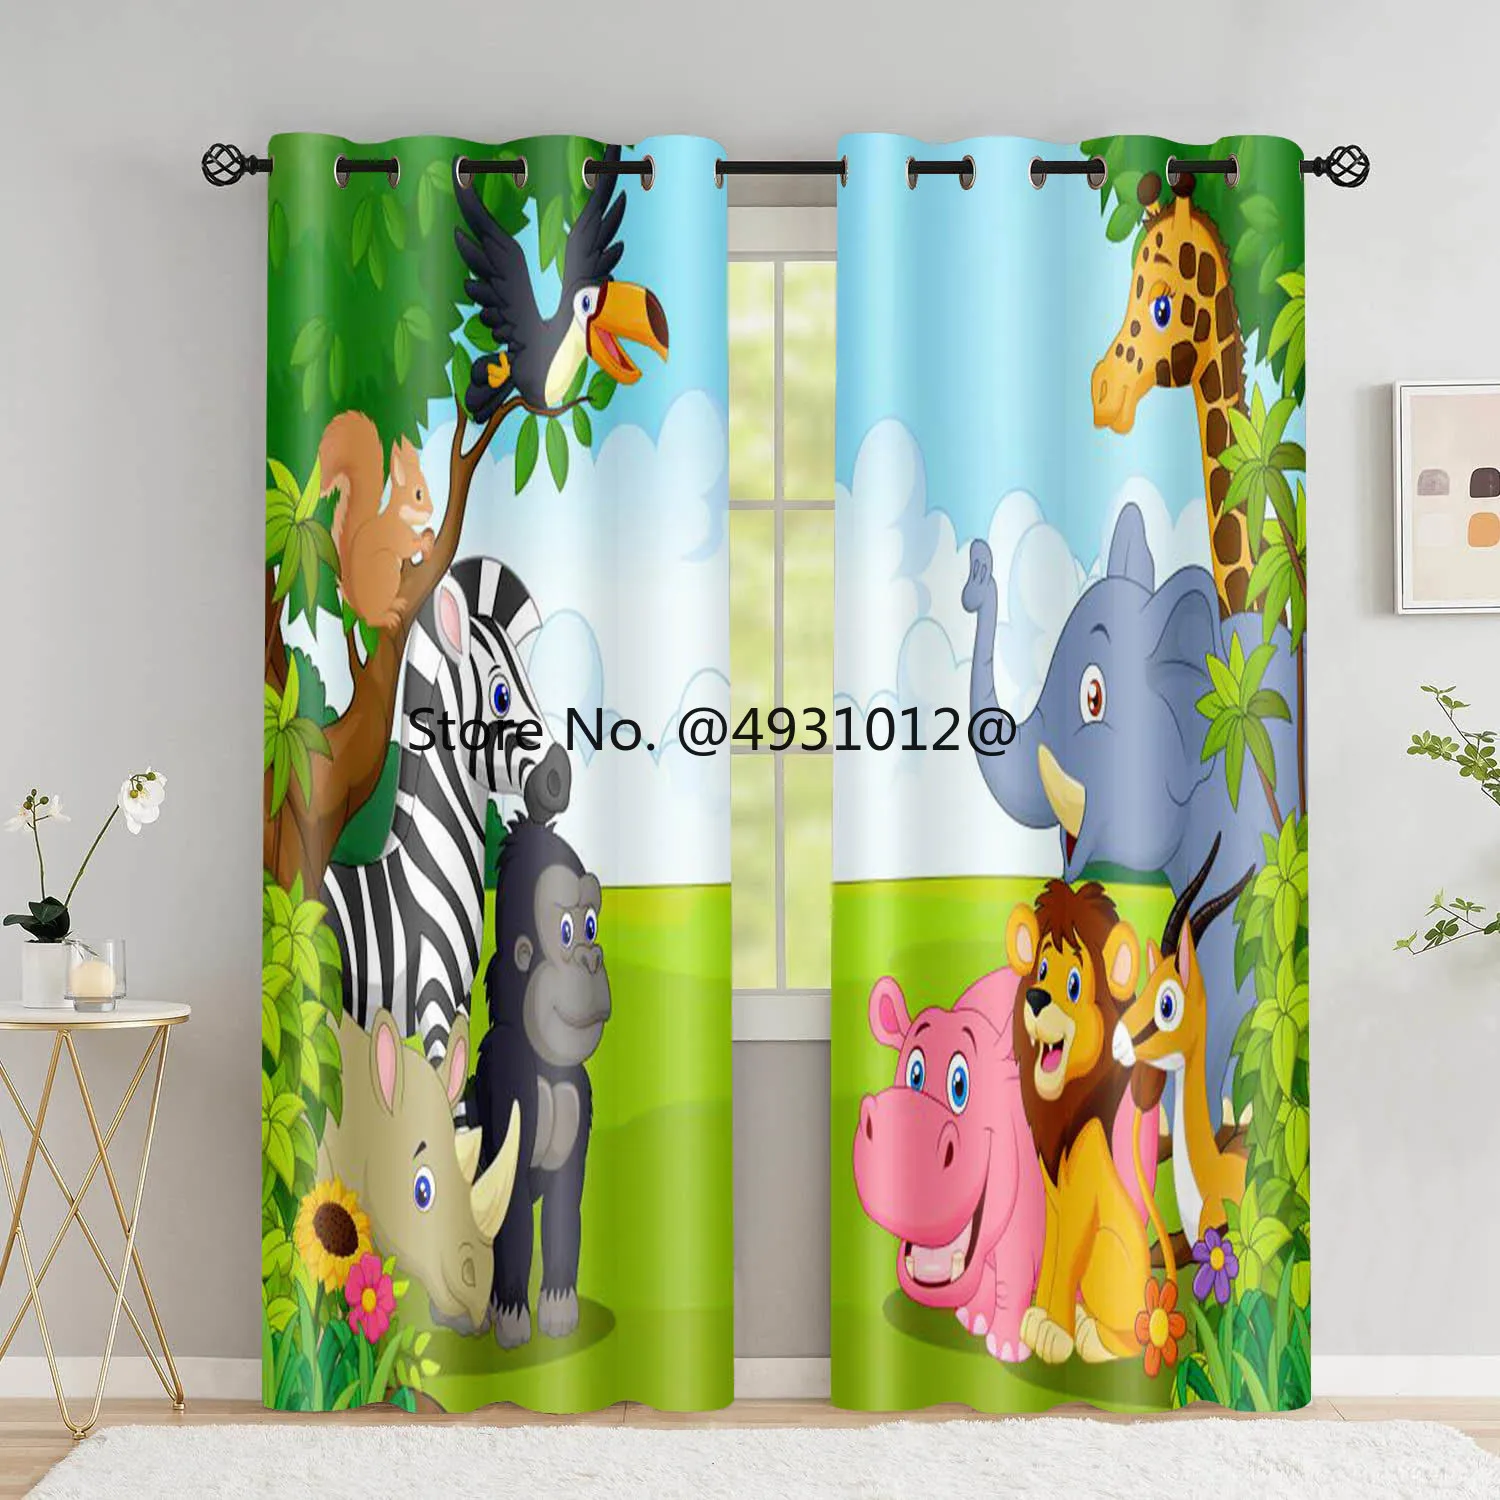 

2023 Animals Window Curtain Anime Jungle Forest Curtains Home Decor Blackout Drapes for Baby Children Bedroom Living Room